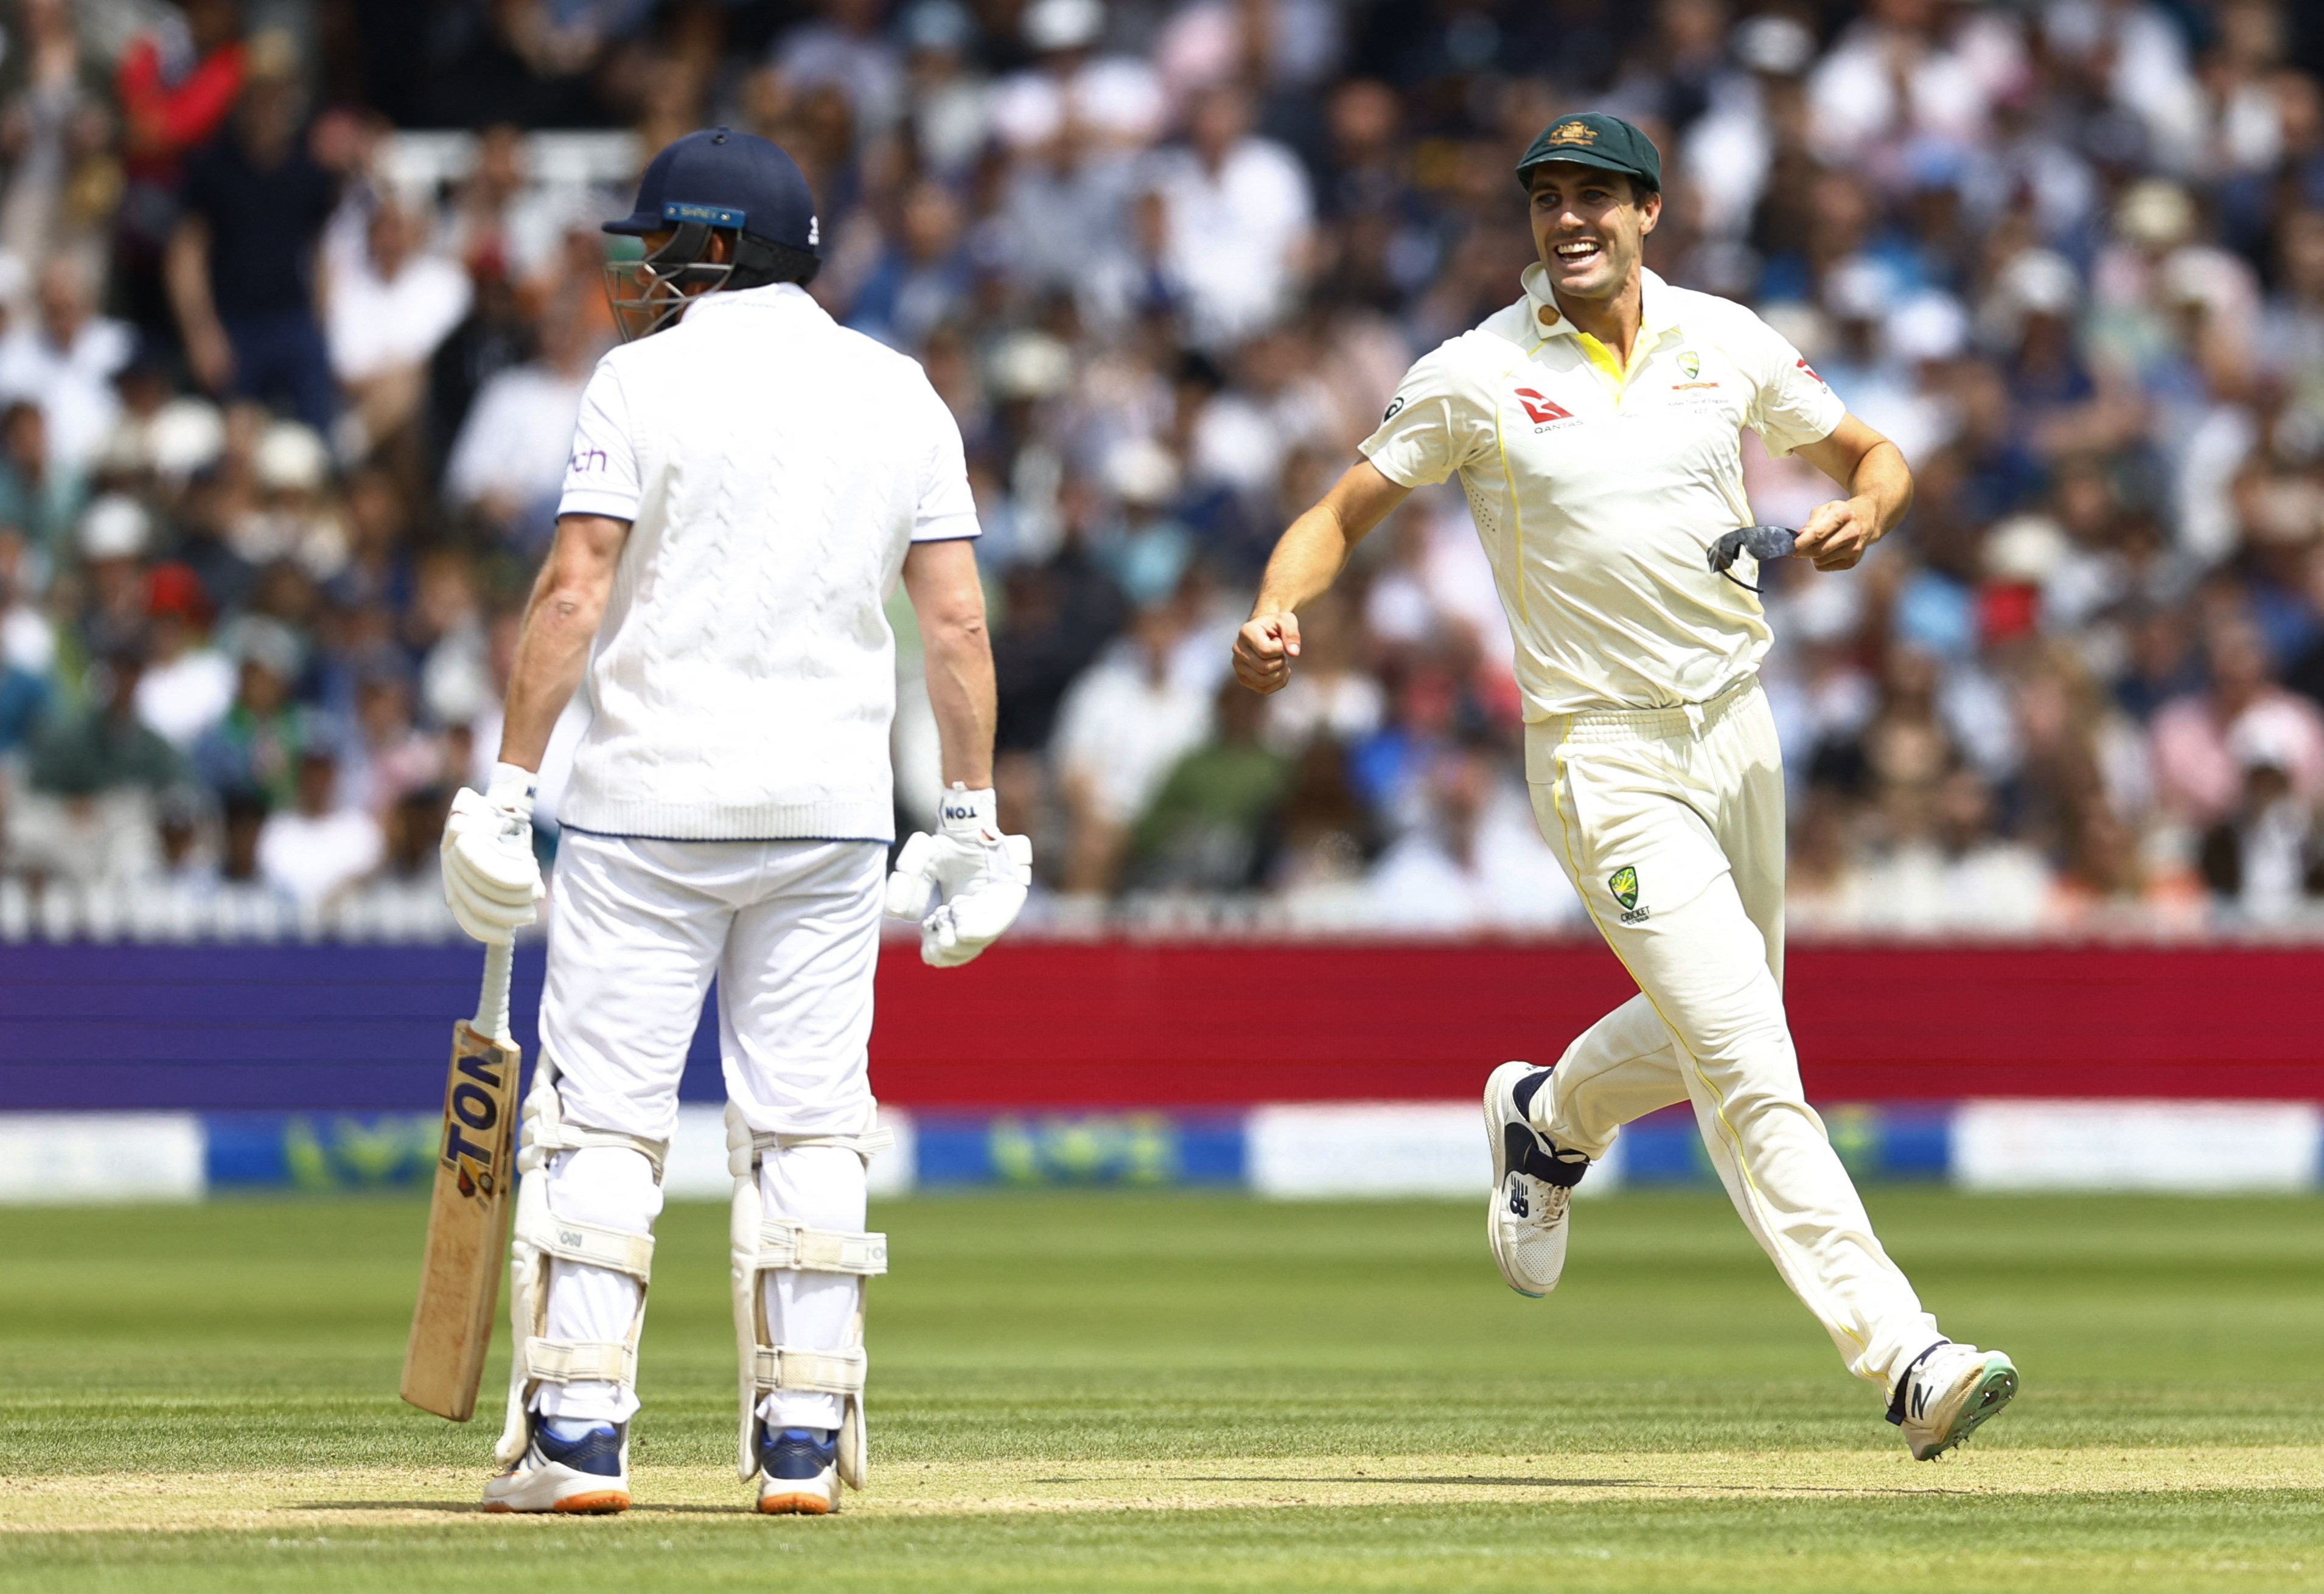 Australia’s Pat Cummins celebrates after England’s Jonny Bairstow was run out, having left his crease thinking, wrongly, that the bowler had finished his over during the second match of the England vs Australia test cricket series. English fans said it wasn’t fair play. Photo: Action Images via Reuters